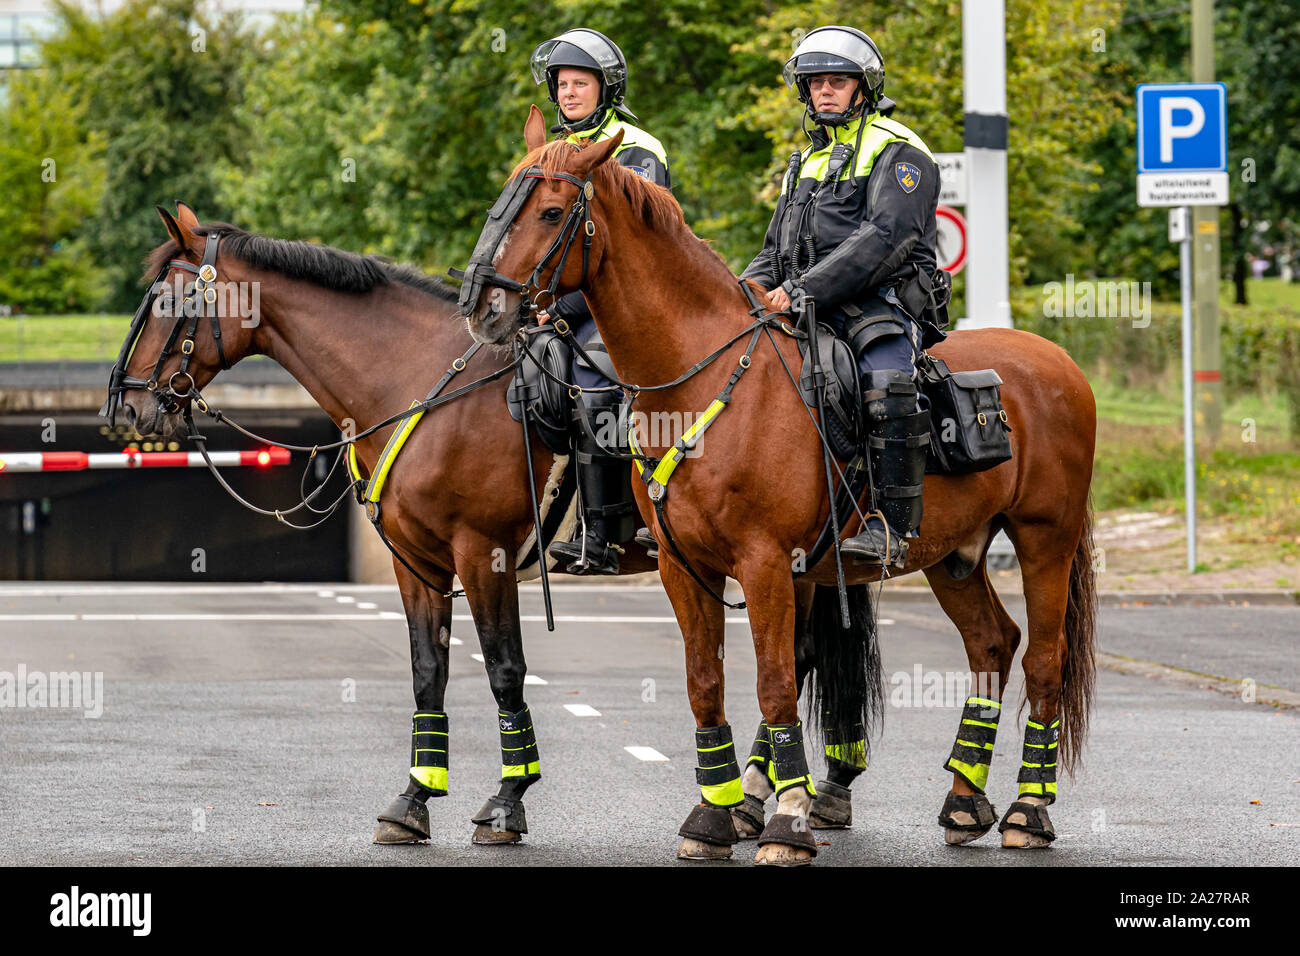 The Hague, Netherlands. 01st Oct, 2019. dutchnews, Farmers protest on Malieveld in The Hague, politie, politie te paard Credit: Pro Shots/Alamy Live News Stock Photo